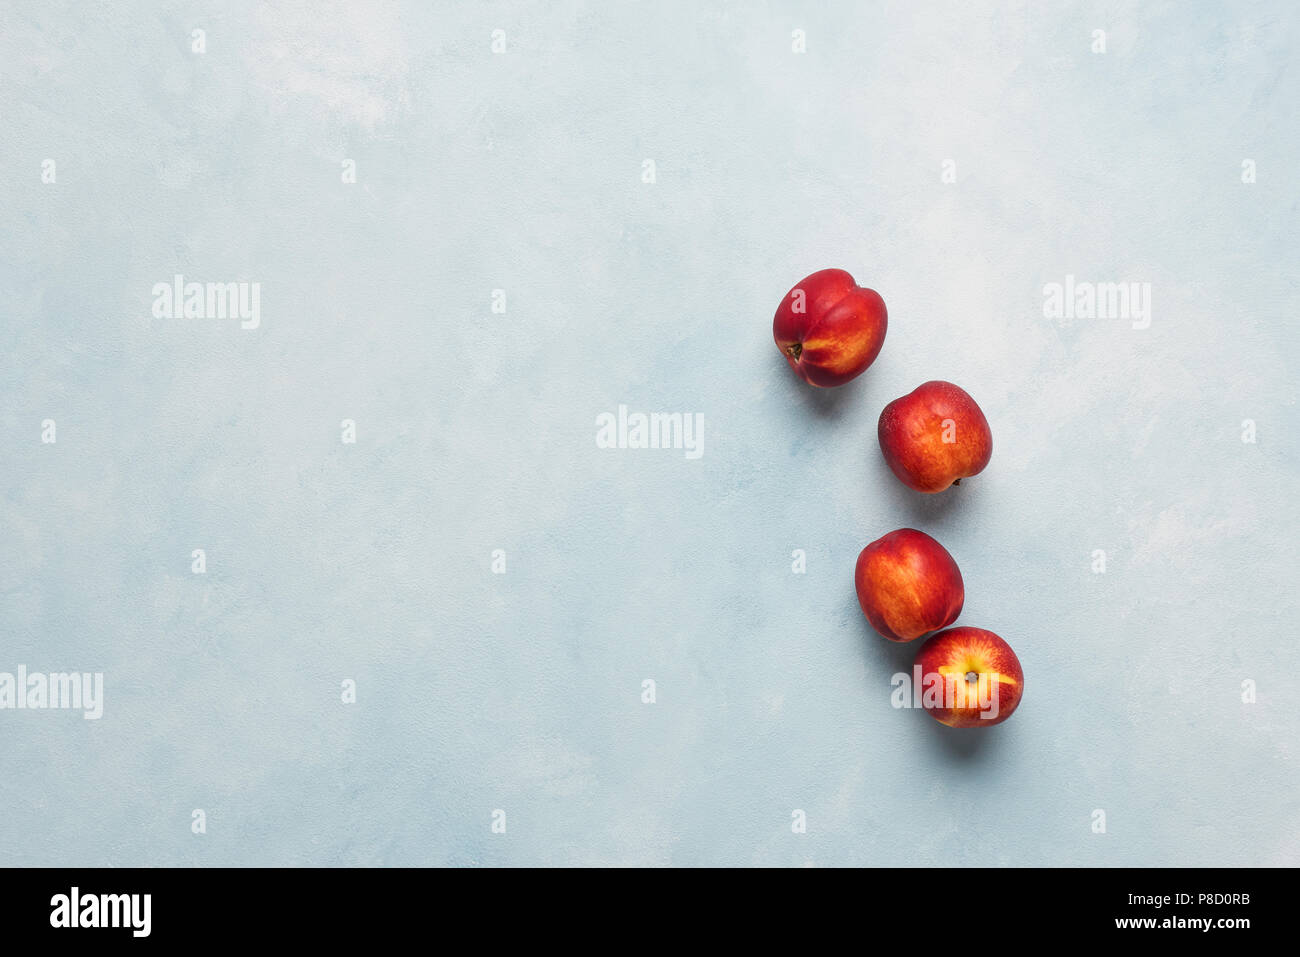 Flat lay of fresh nectarines fruits on light blue background. Top view with copy space. Stock Photo